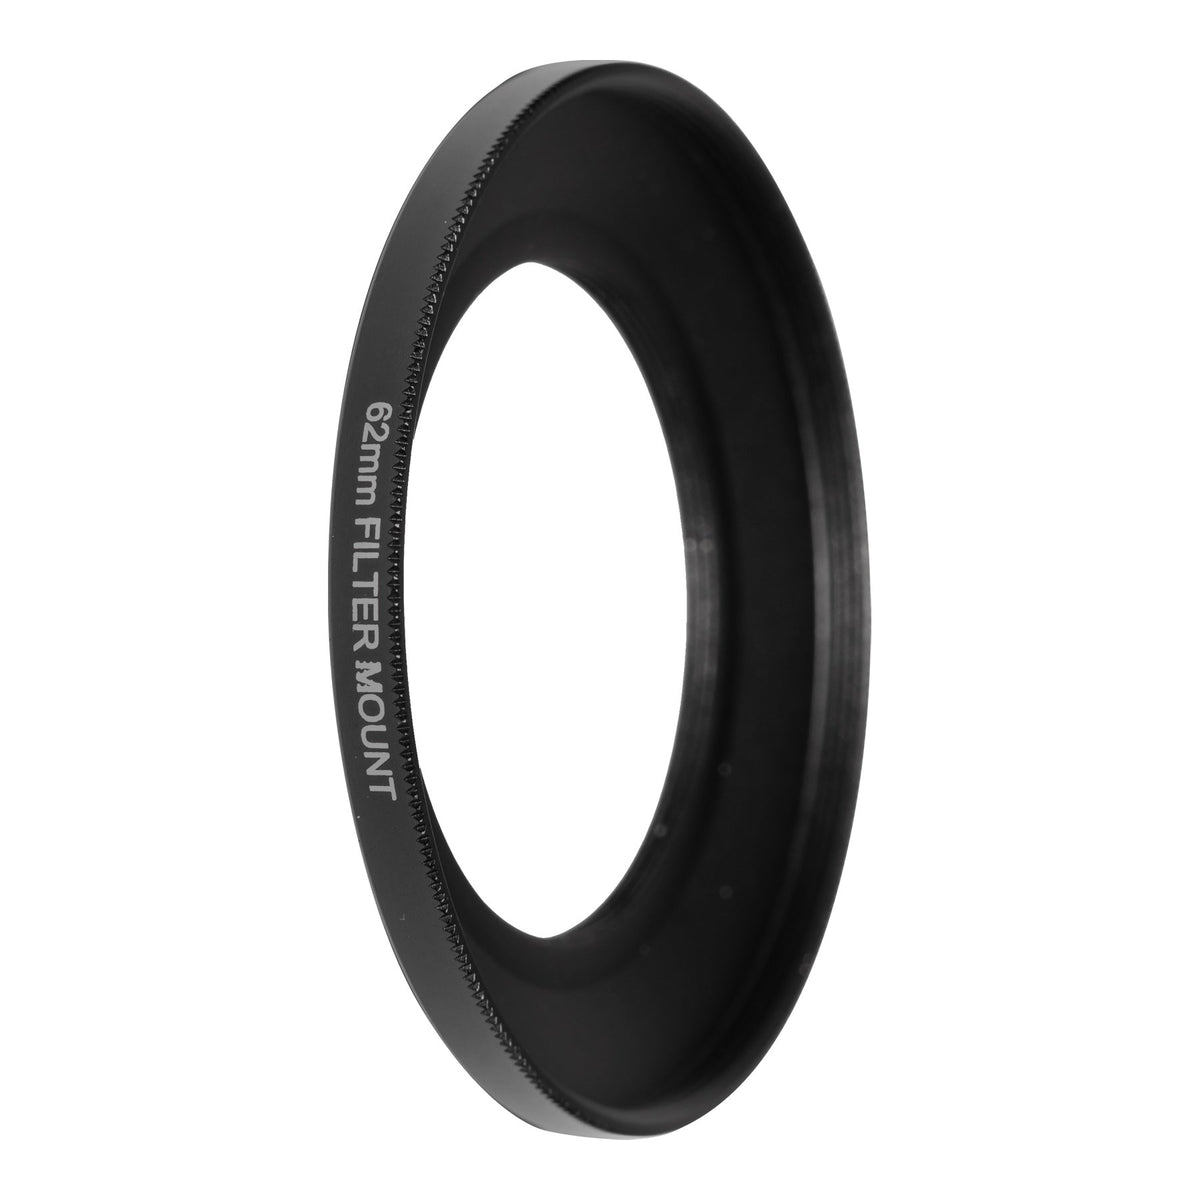 Step-Up Adapter Ring 62mm (for Pro Series Lenses) - REEFLEX